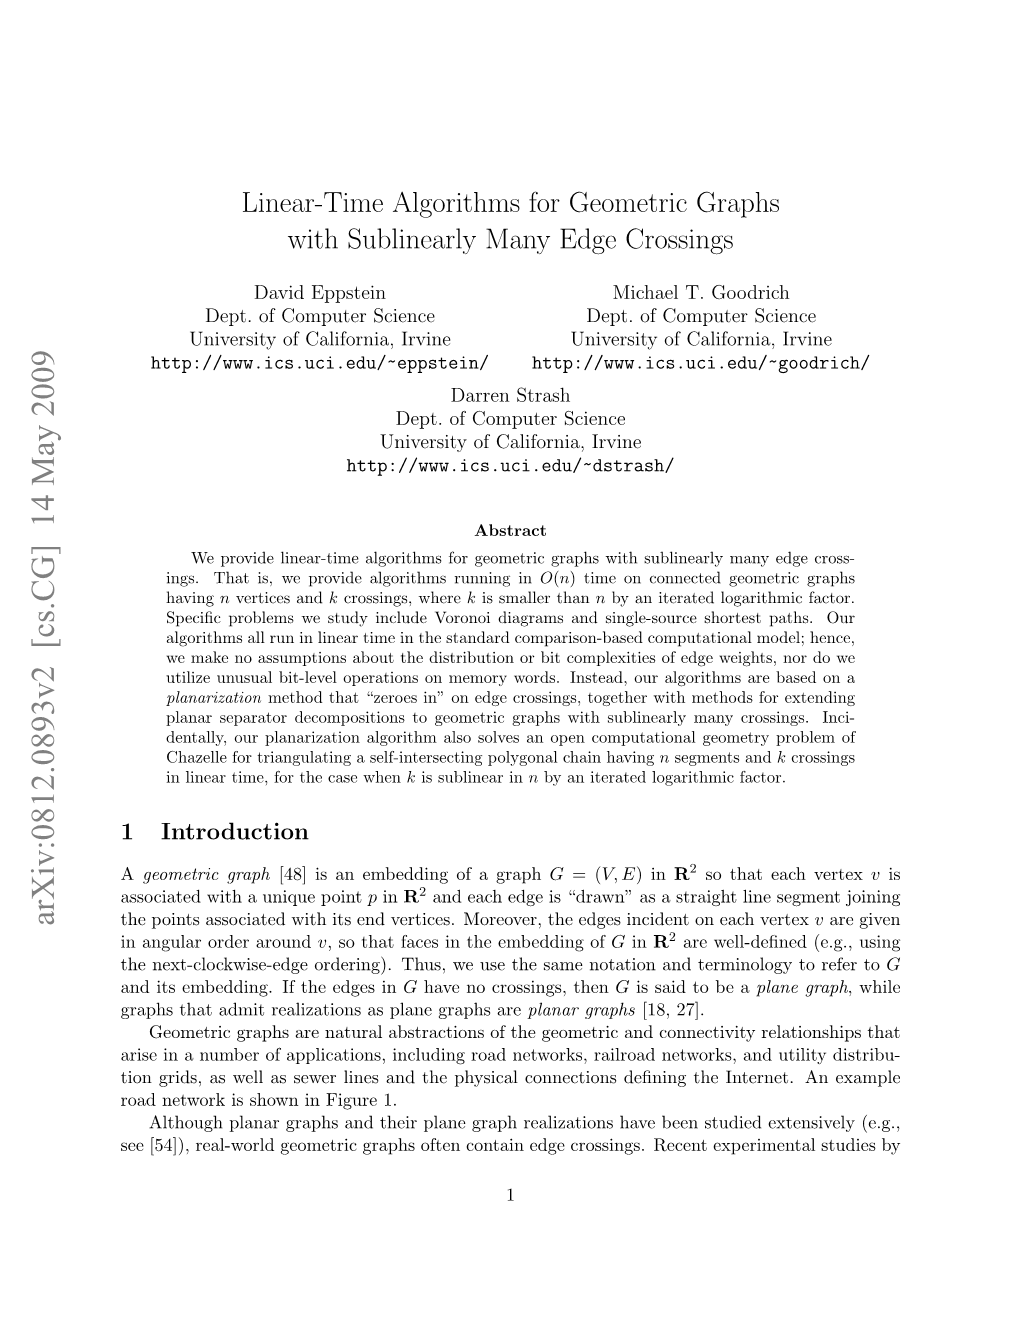 Linear-Time Algorithms for Geometric Graphs with Sublinearly Many Edge Crossings